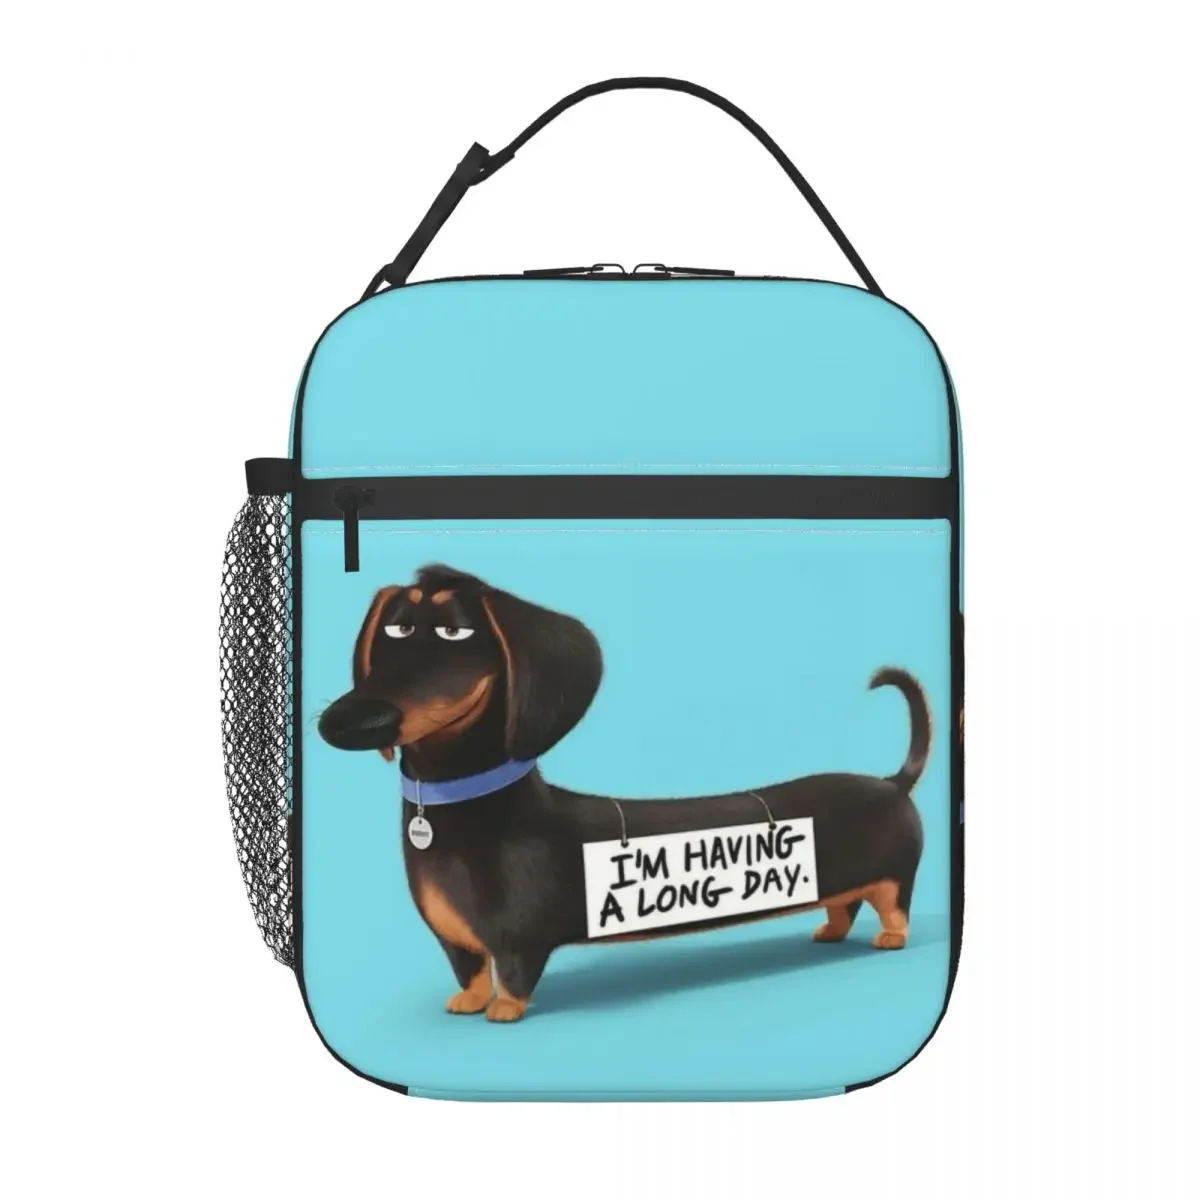 

Kawaii Dachshund Insulated Lunch Bag for Camping Travel Wiener Badger Sausage Dog Resuable Cooler Thermal Lunch Box Women Kids